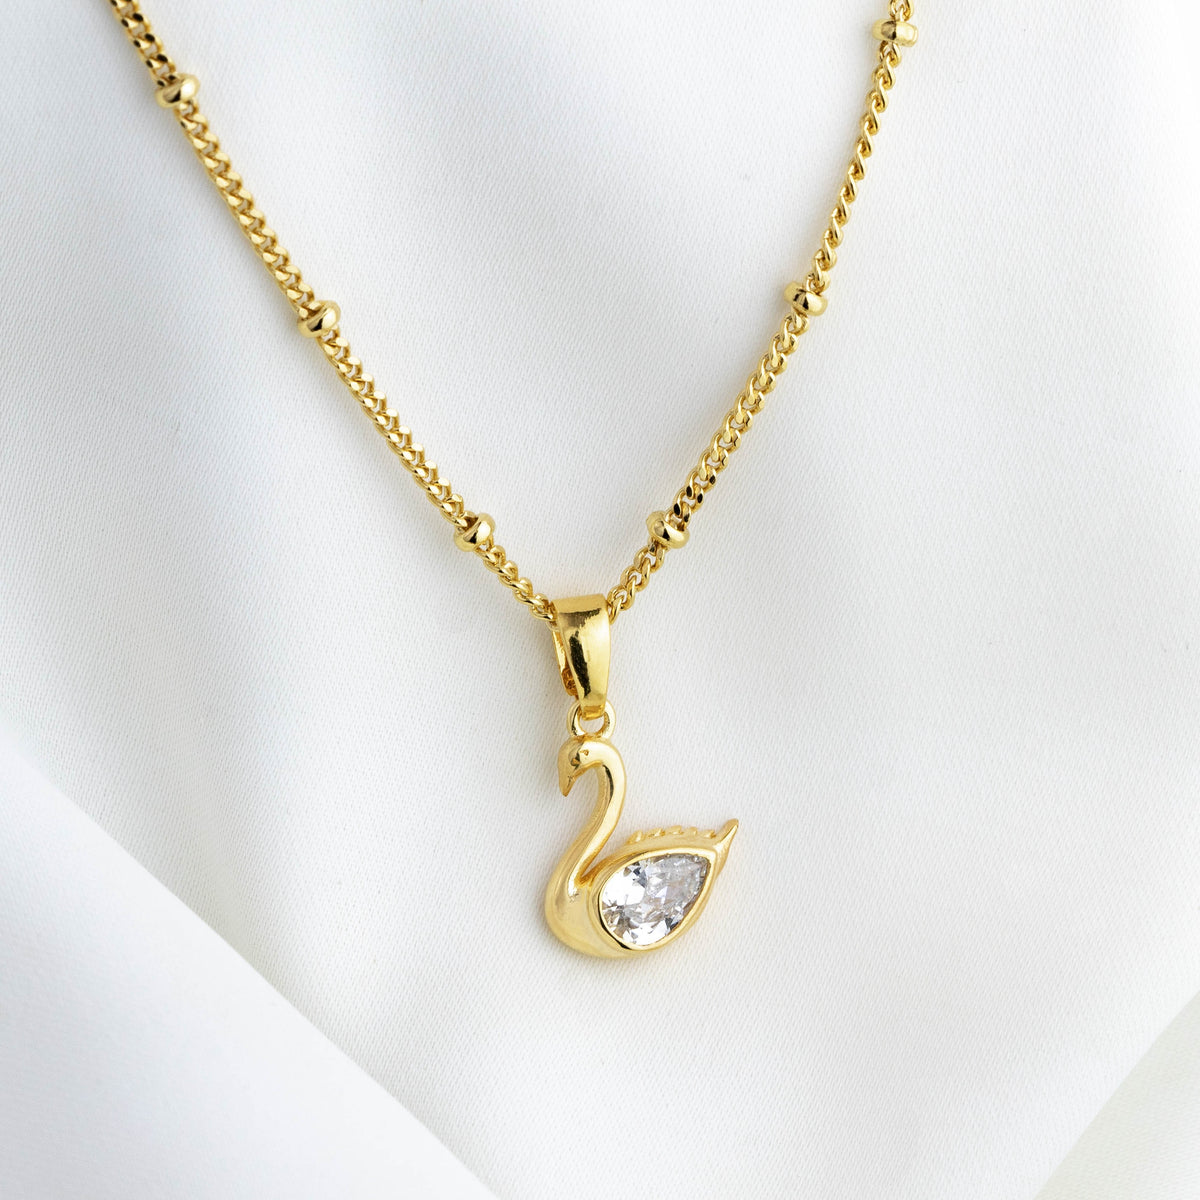 Swan Necklace